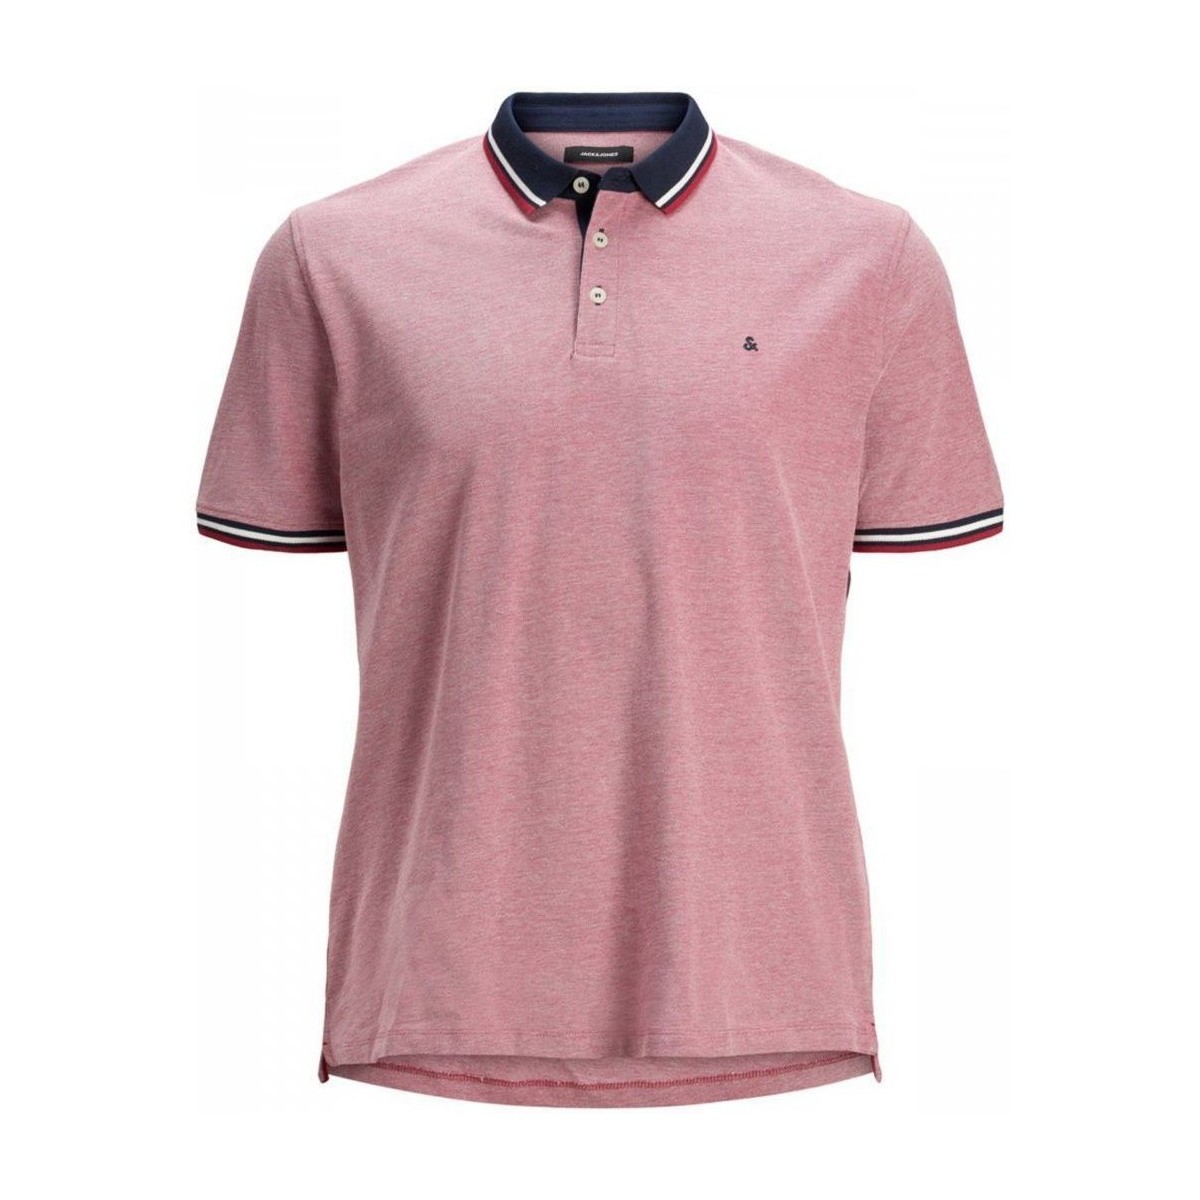 Vêtements Homme T-shirts & Polos Jack & Jones 12143859 PAULOS POLO SS-RIO RED Rouge